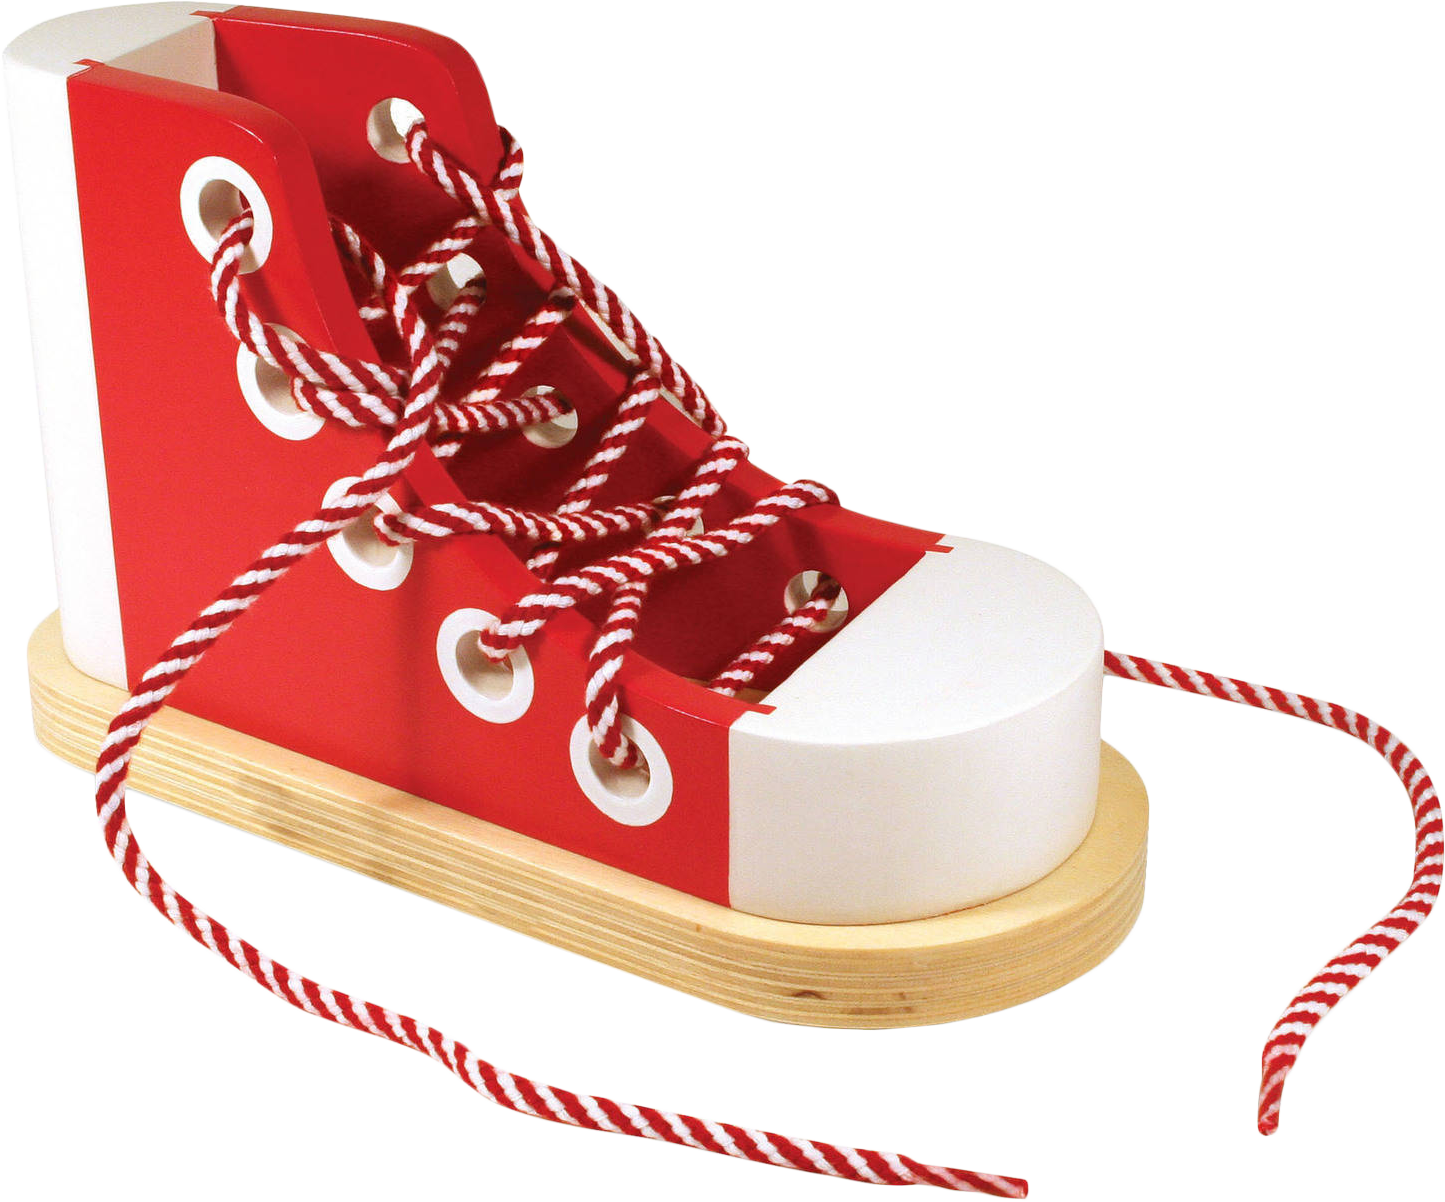 Redand White Laced Wooden Shoe Model PNG image